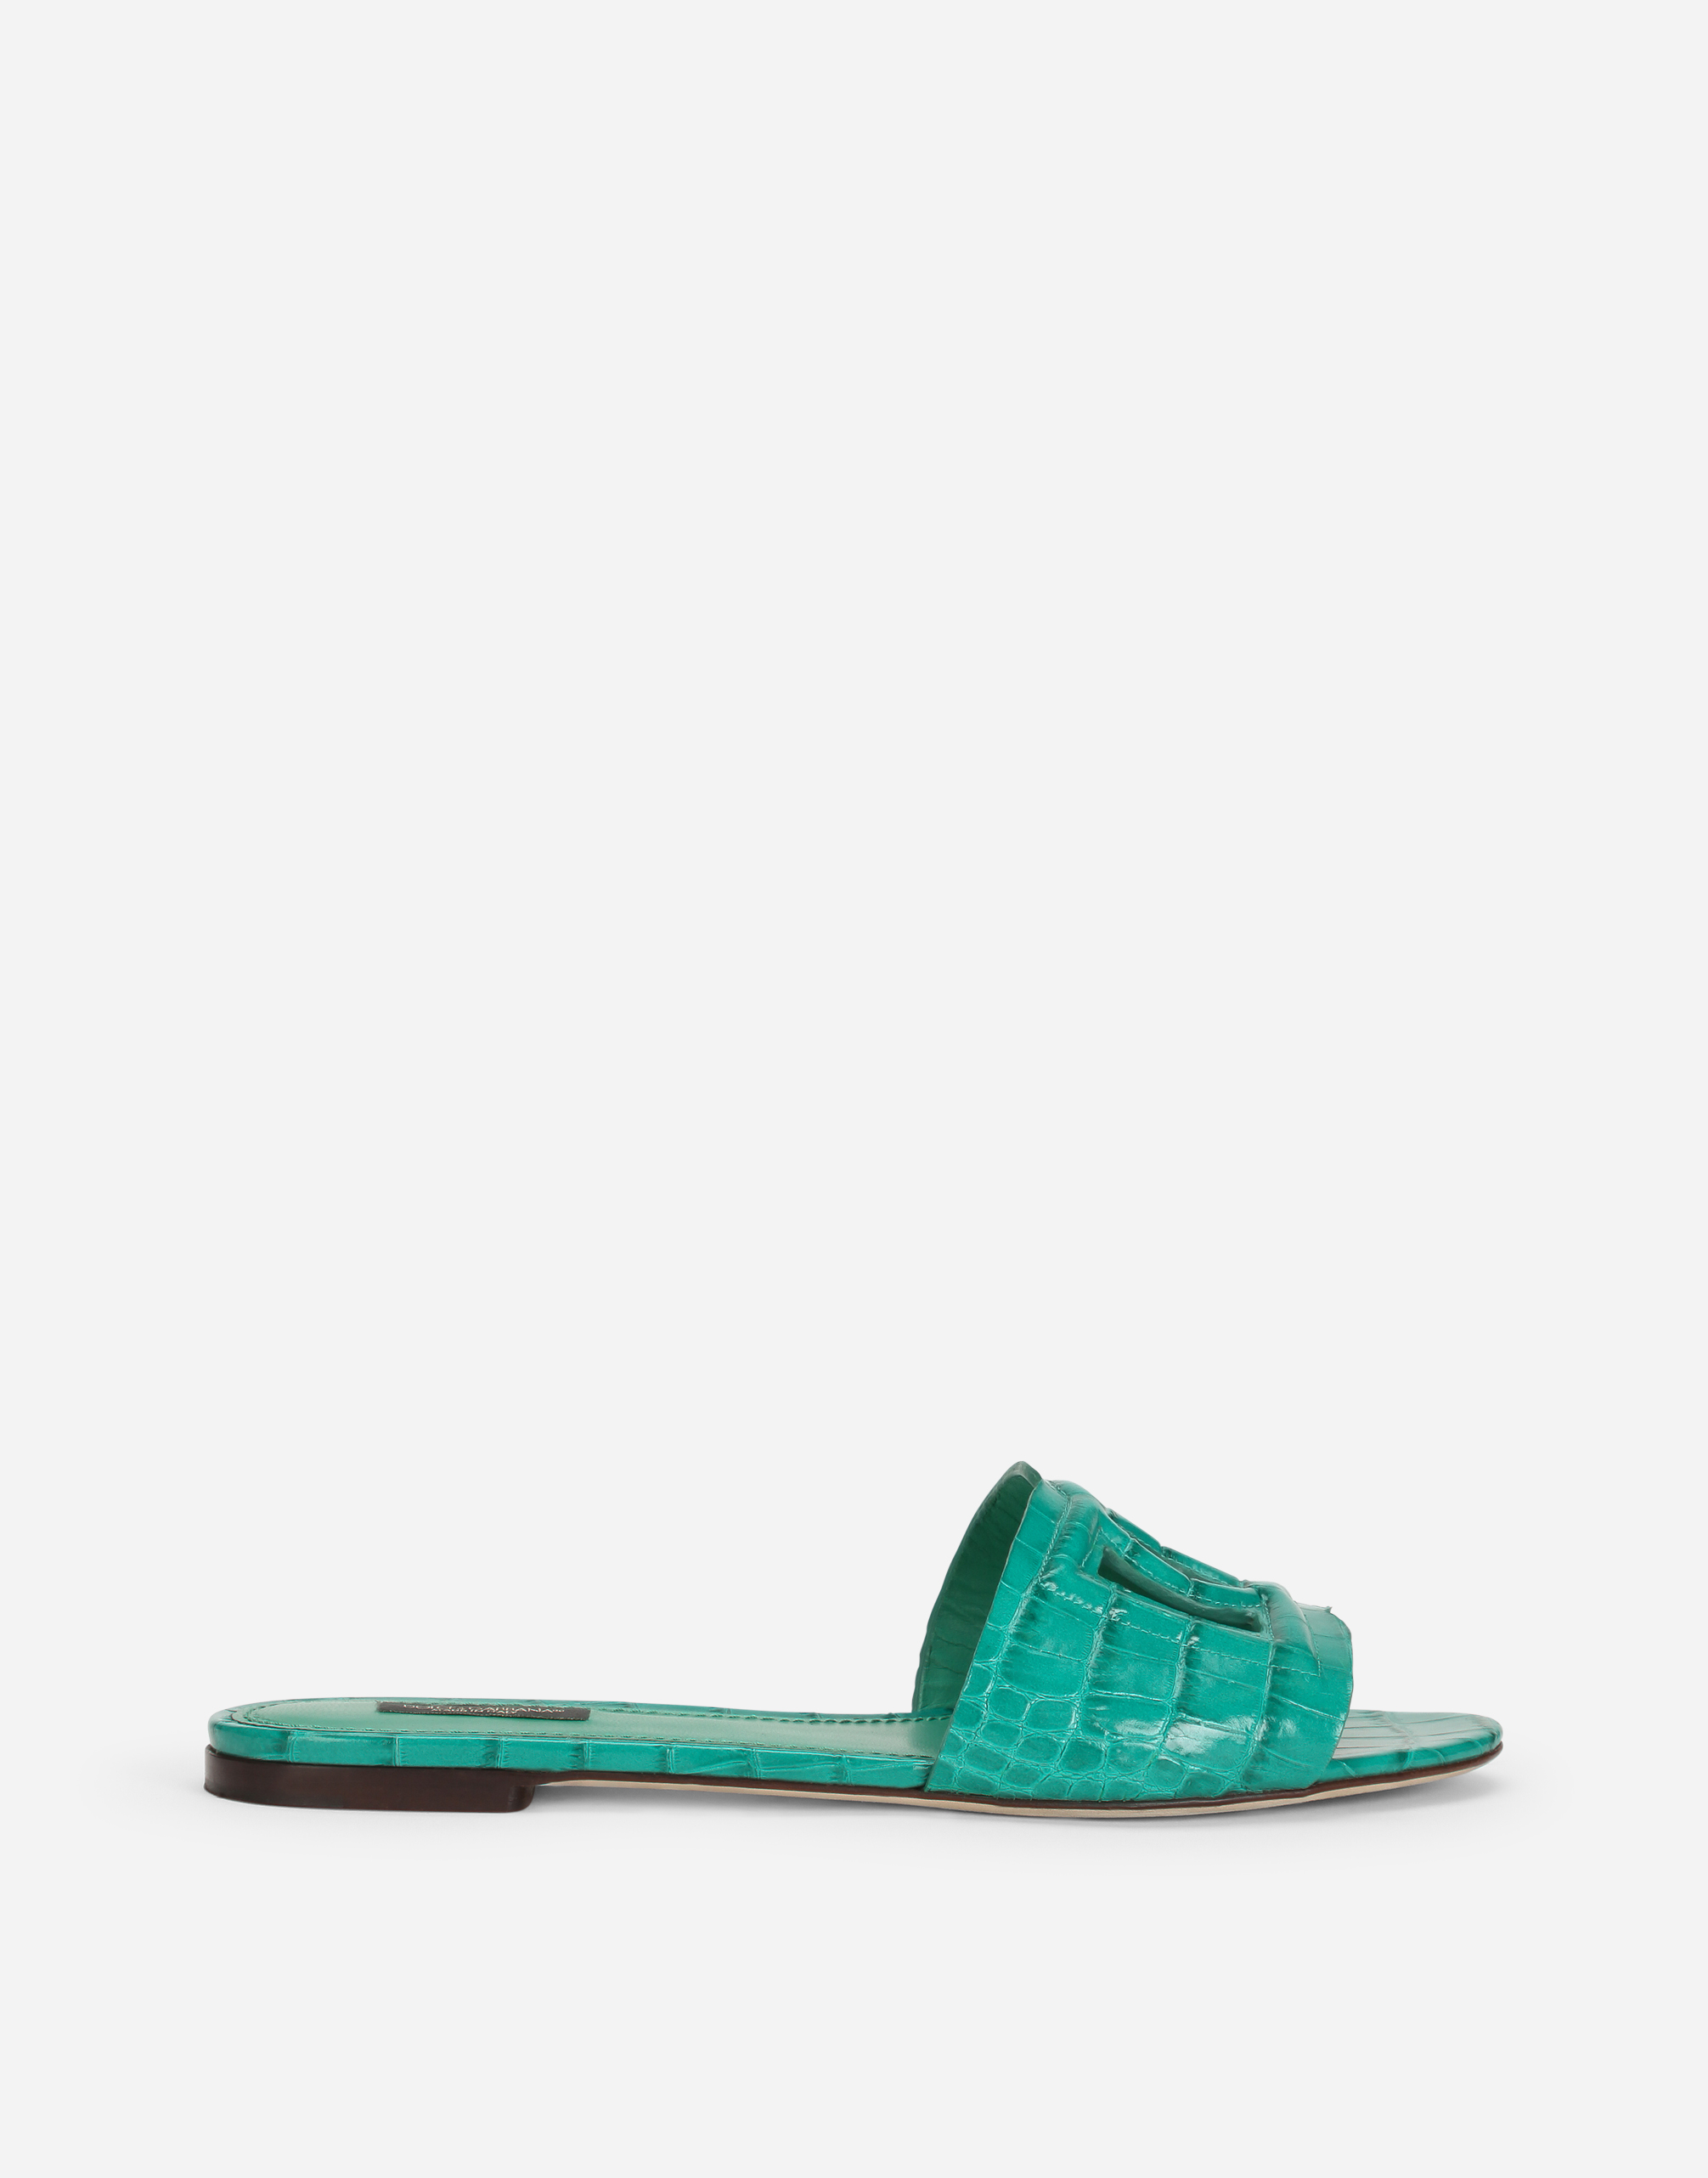 Crocodile flank leather sliders with the DG Millennials logo in Green